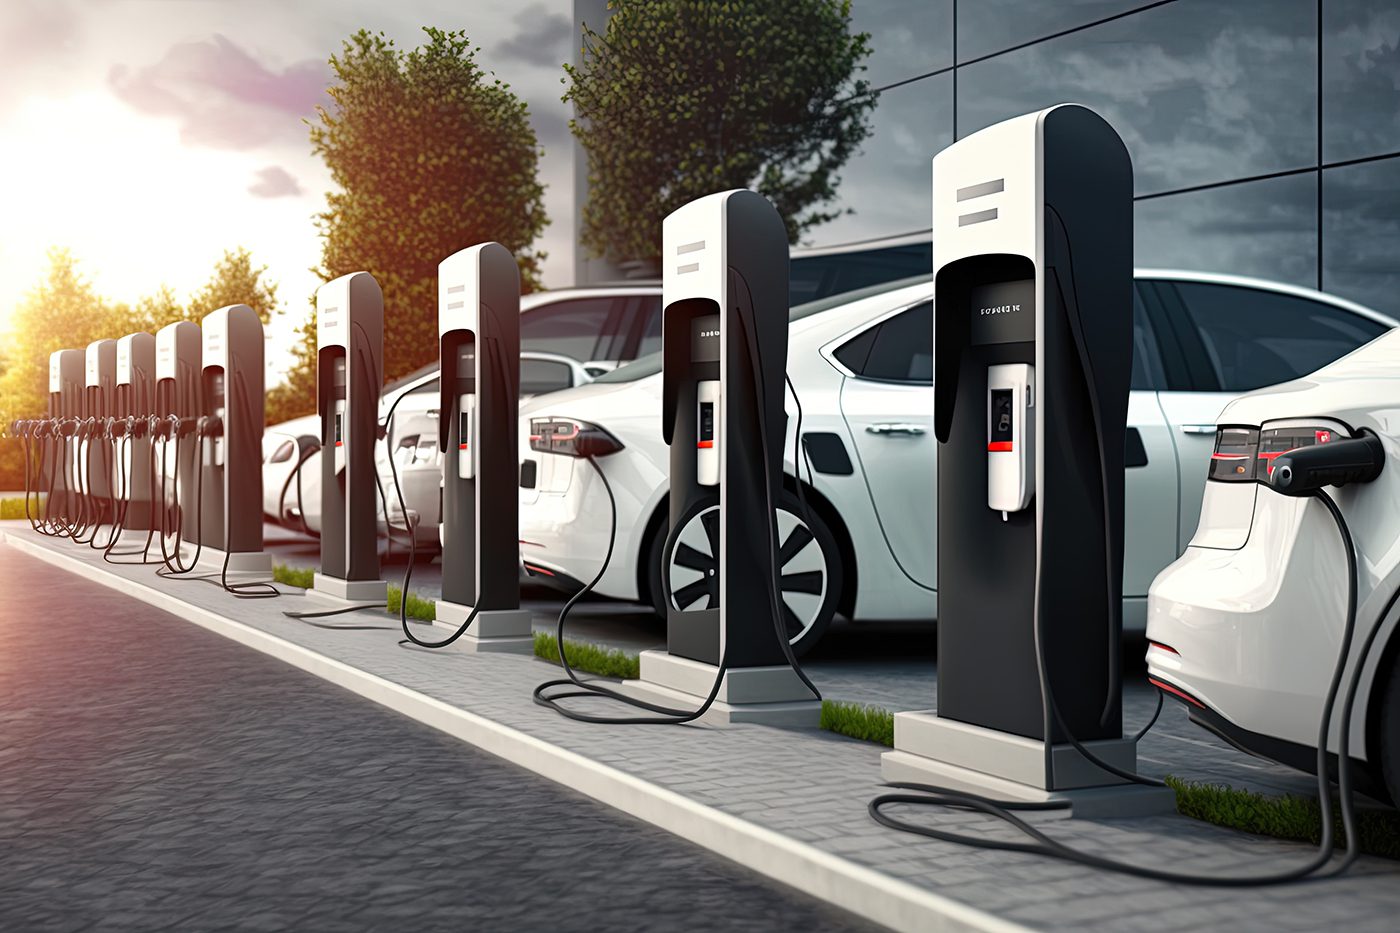 A row of white electric vehicles parked at a charging station, with all cars plugged in.